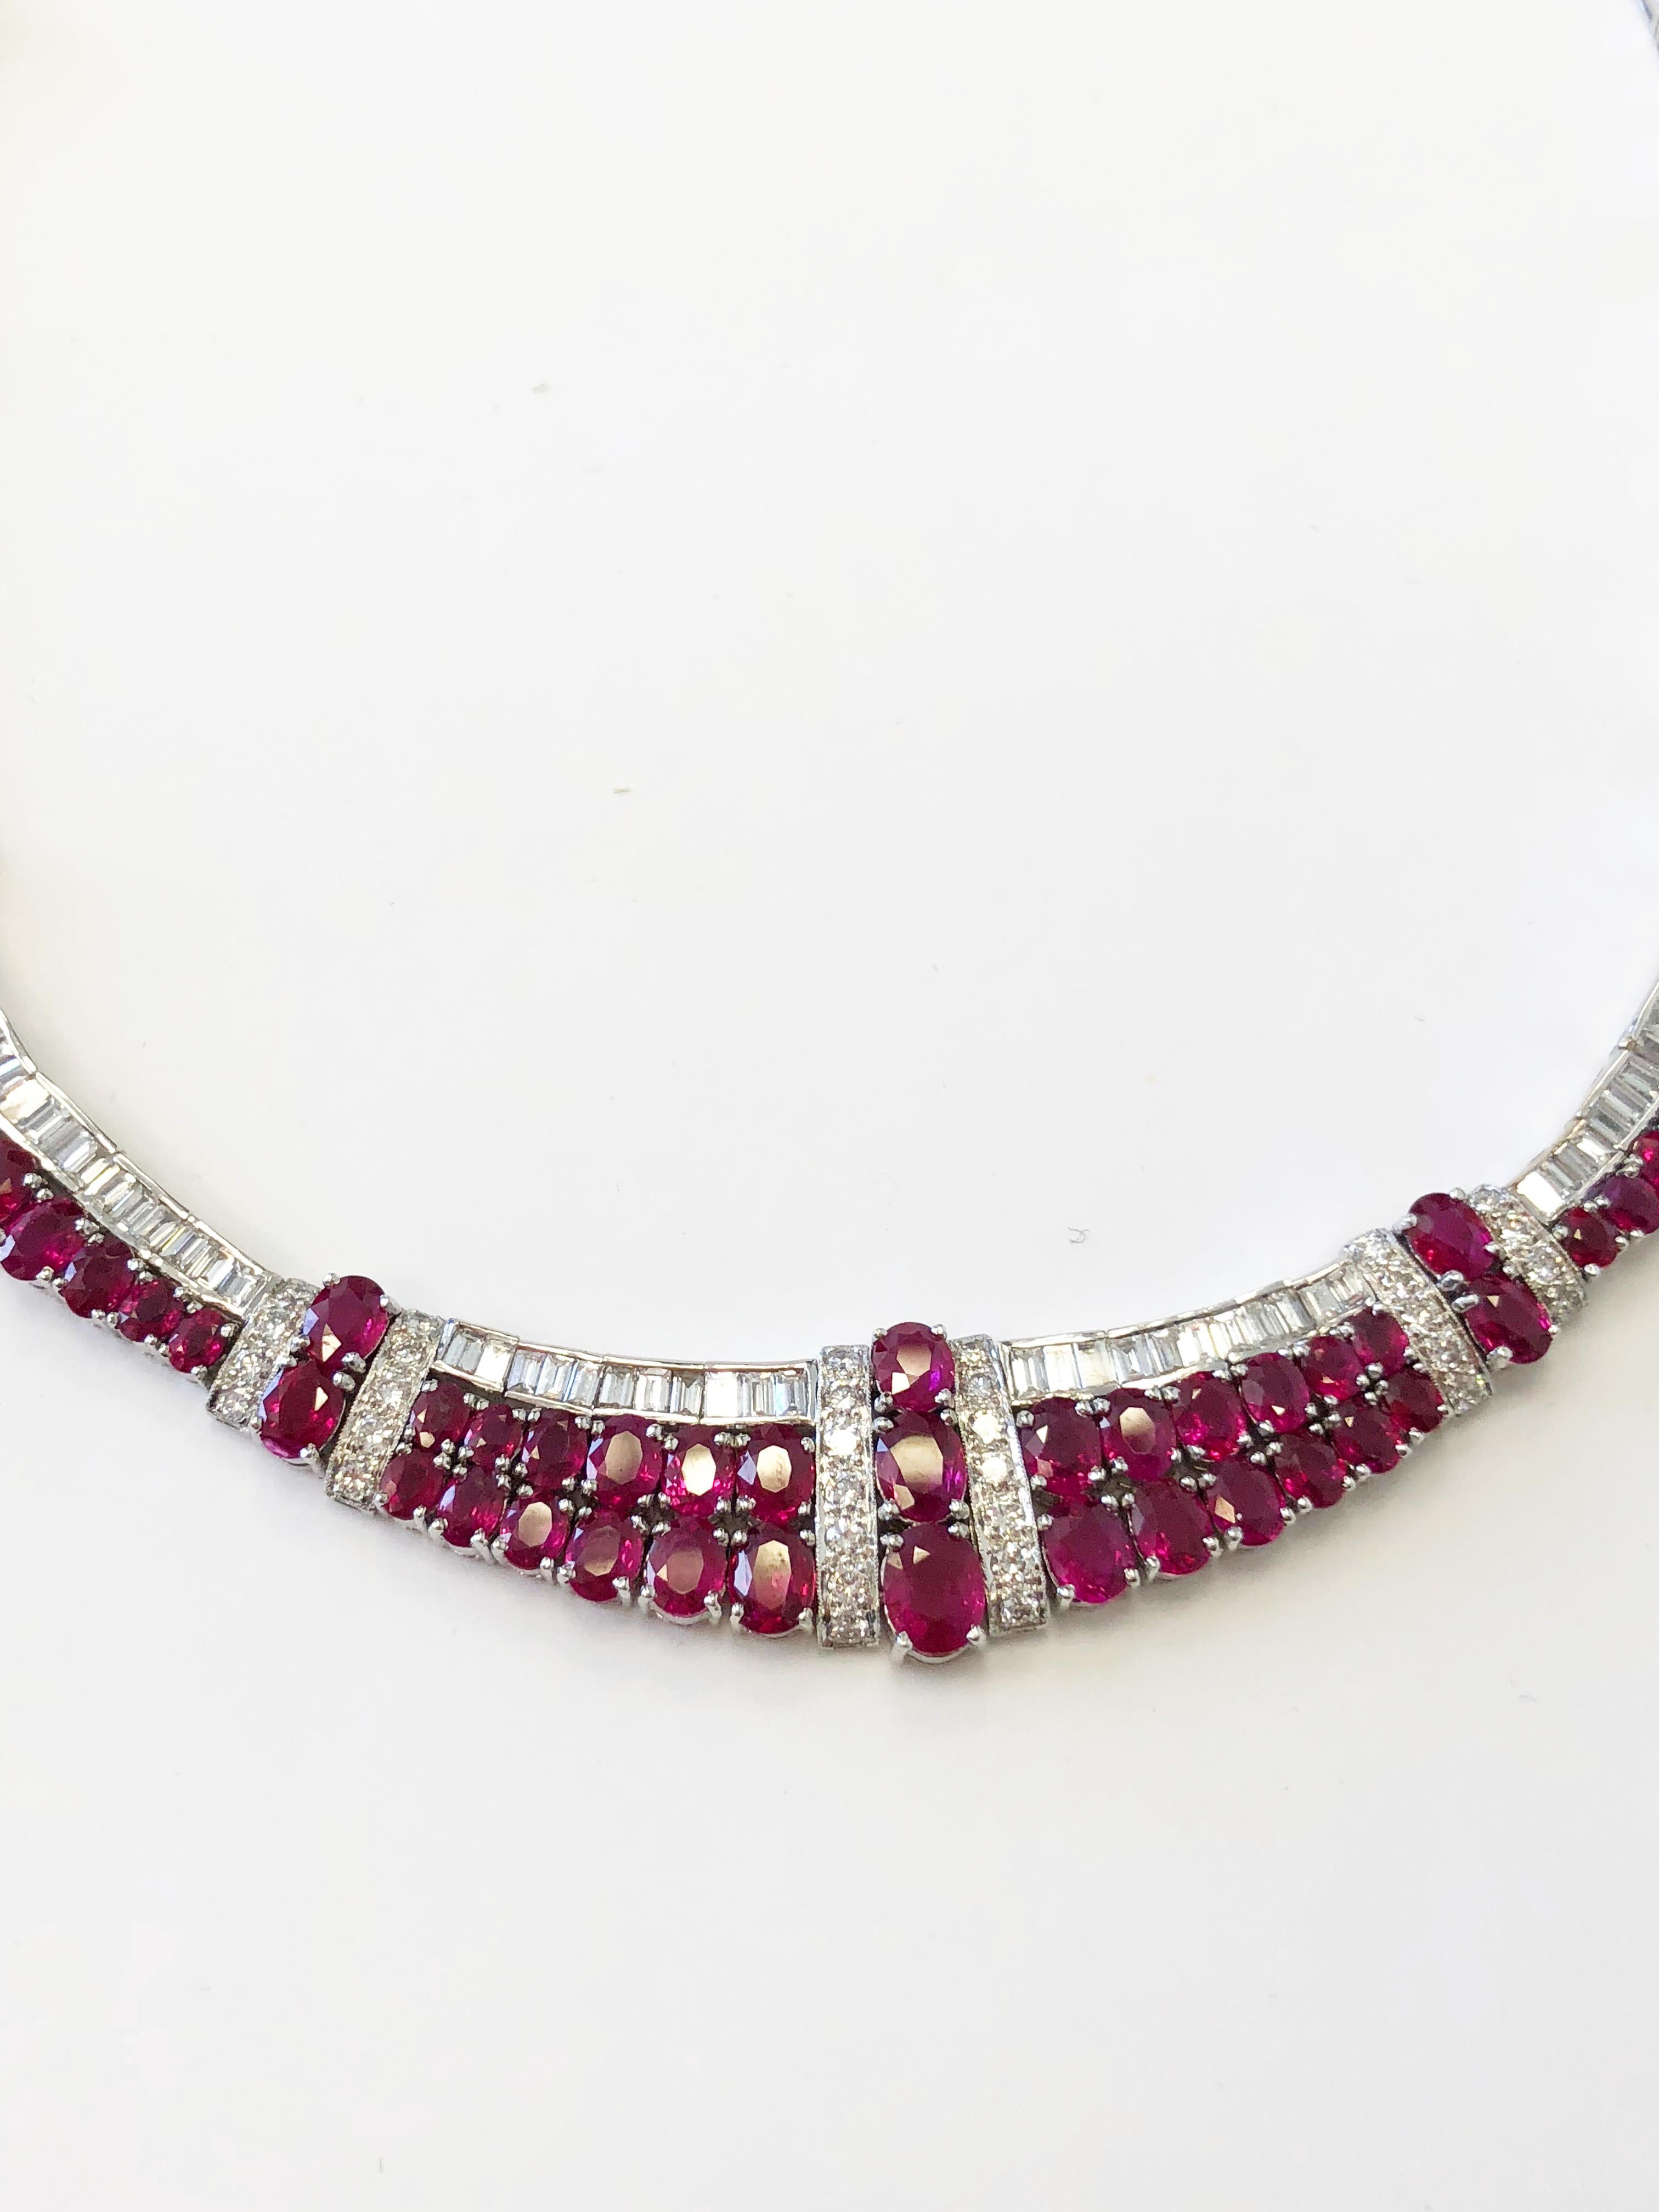 Beautiful deep red ruby ovals weighing 50 carats with 15 carats of bright white baguette and round diamonds in a handmade 18k white gold mounting.  Necklace is made nicely with no chunky gold and good flexibility.  Stones are bright and the design